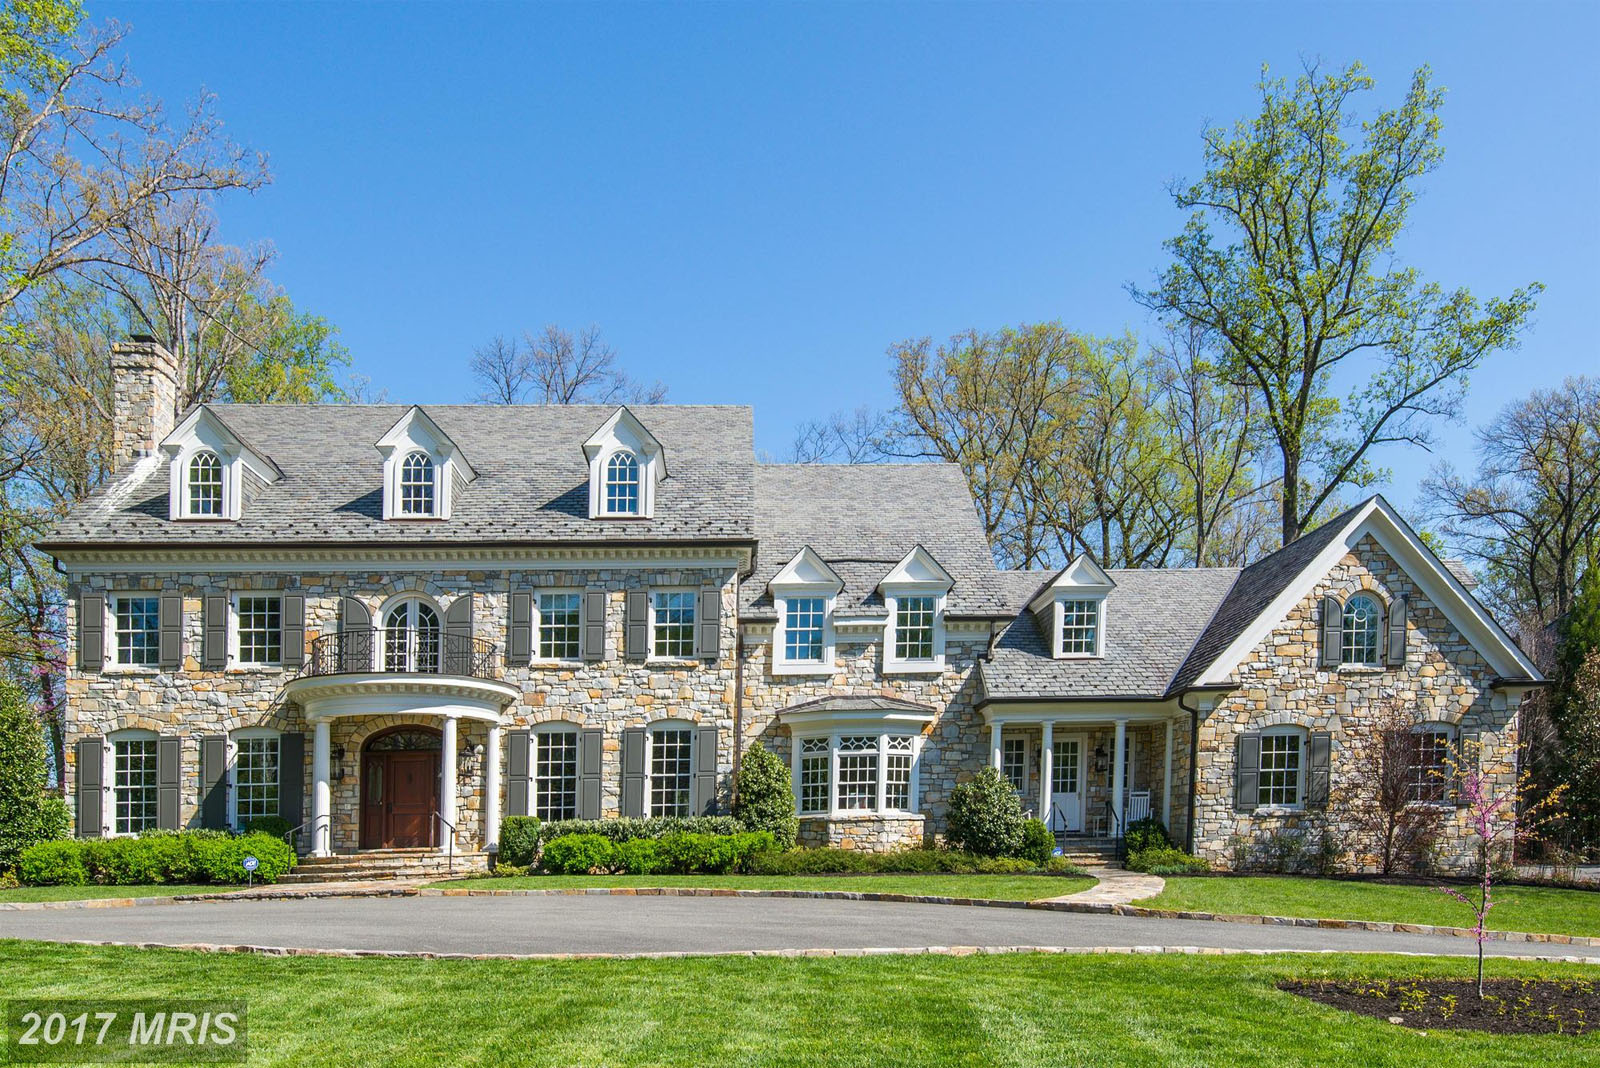 5. $3,800,000



9101 Burning Tree Road

Bethesda, Maryland





This Colonial-style home, built in 2008, has 8 bedrooms, 10 bathrooms and one half-bath. (Courtesy MRIS, a Bright MLS)